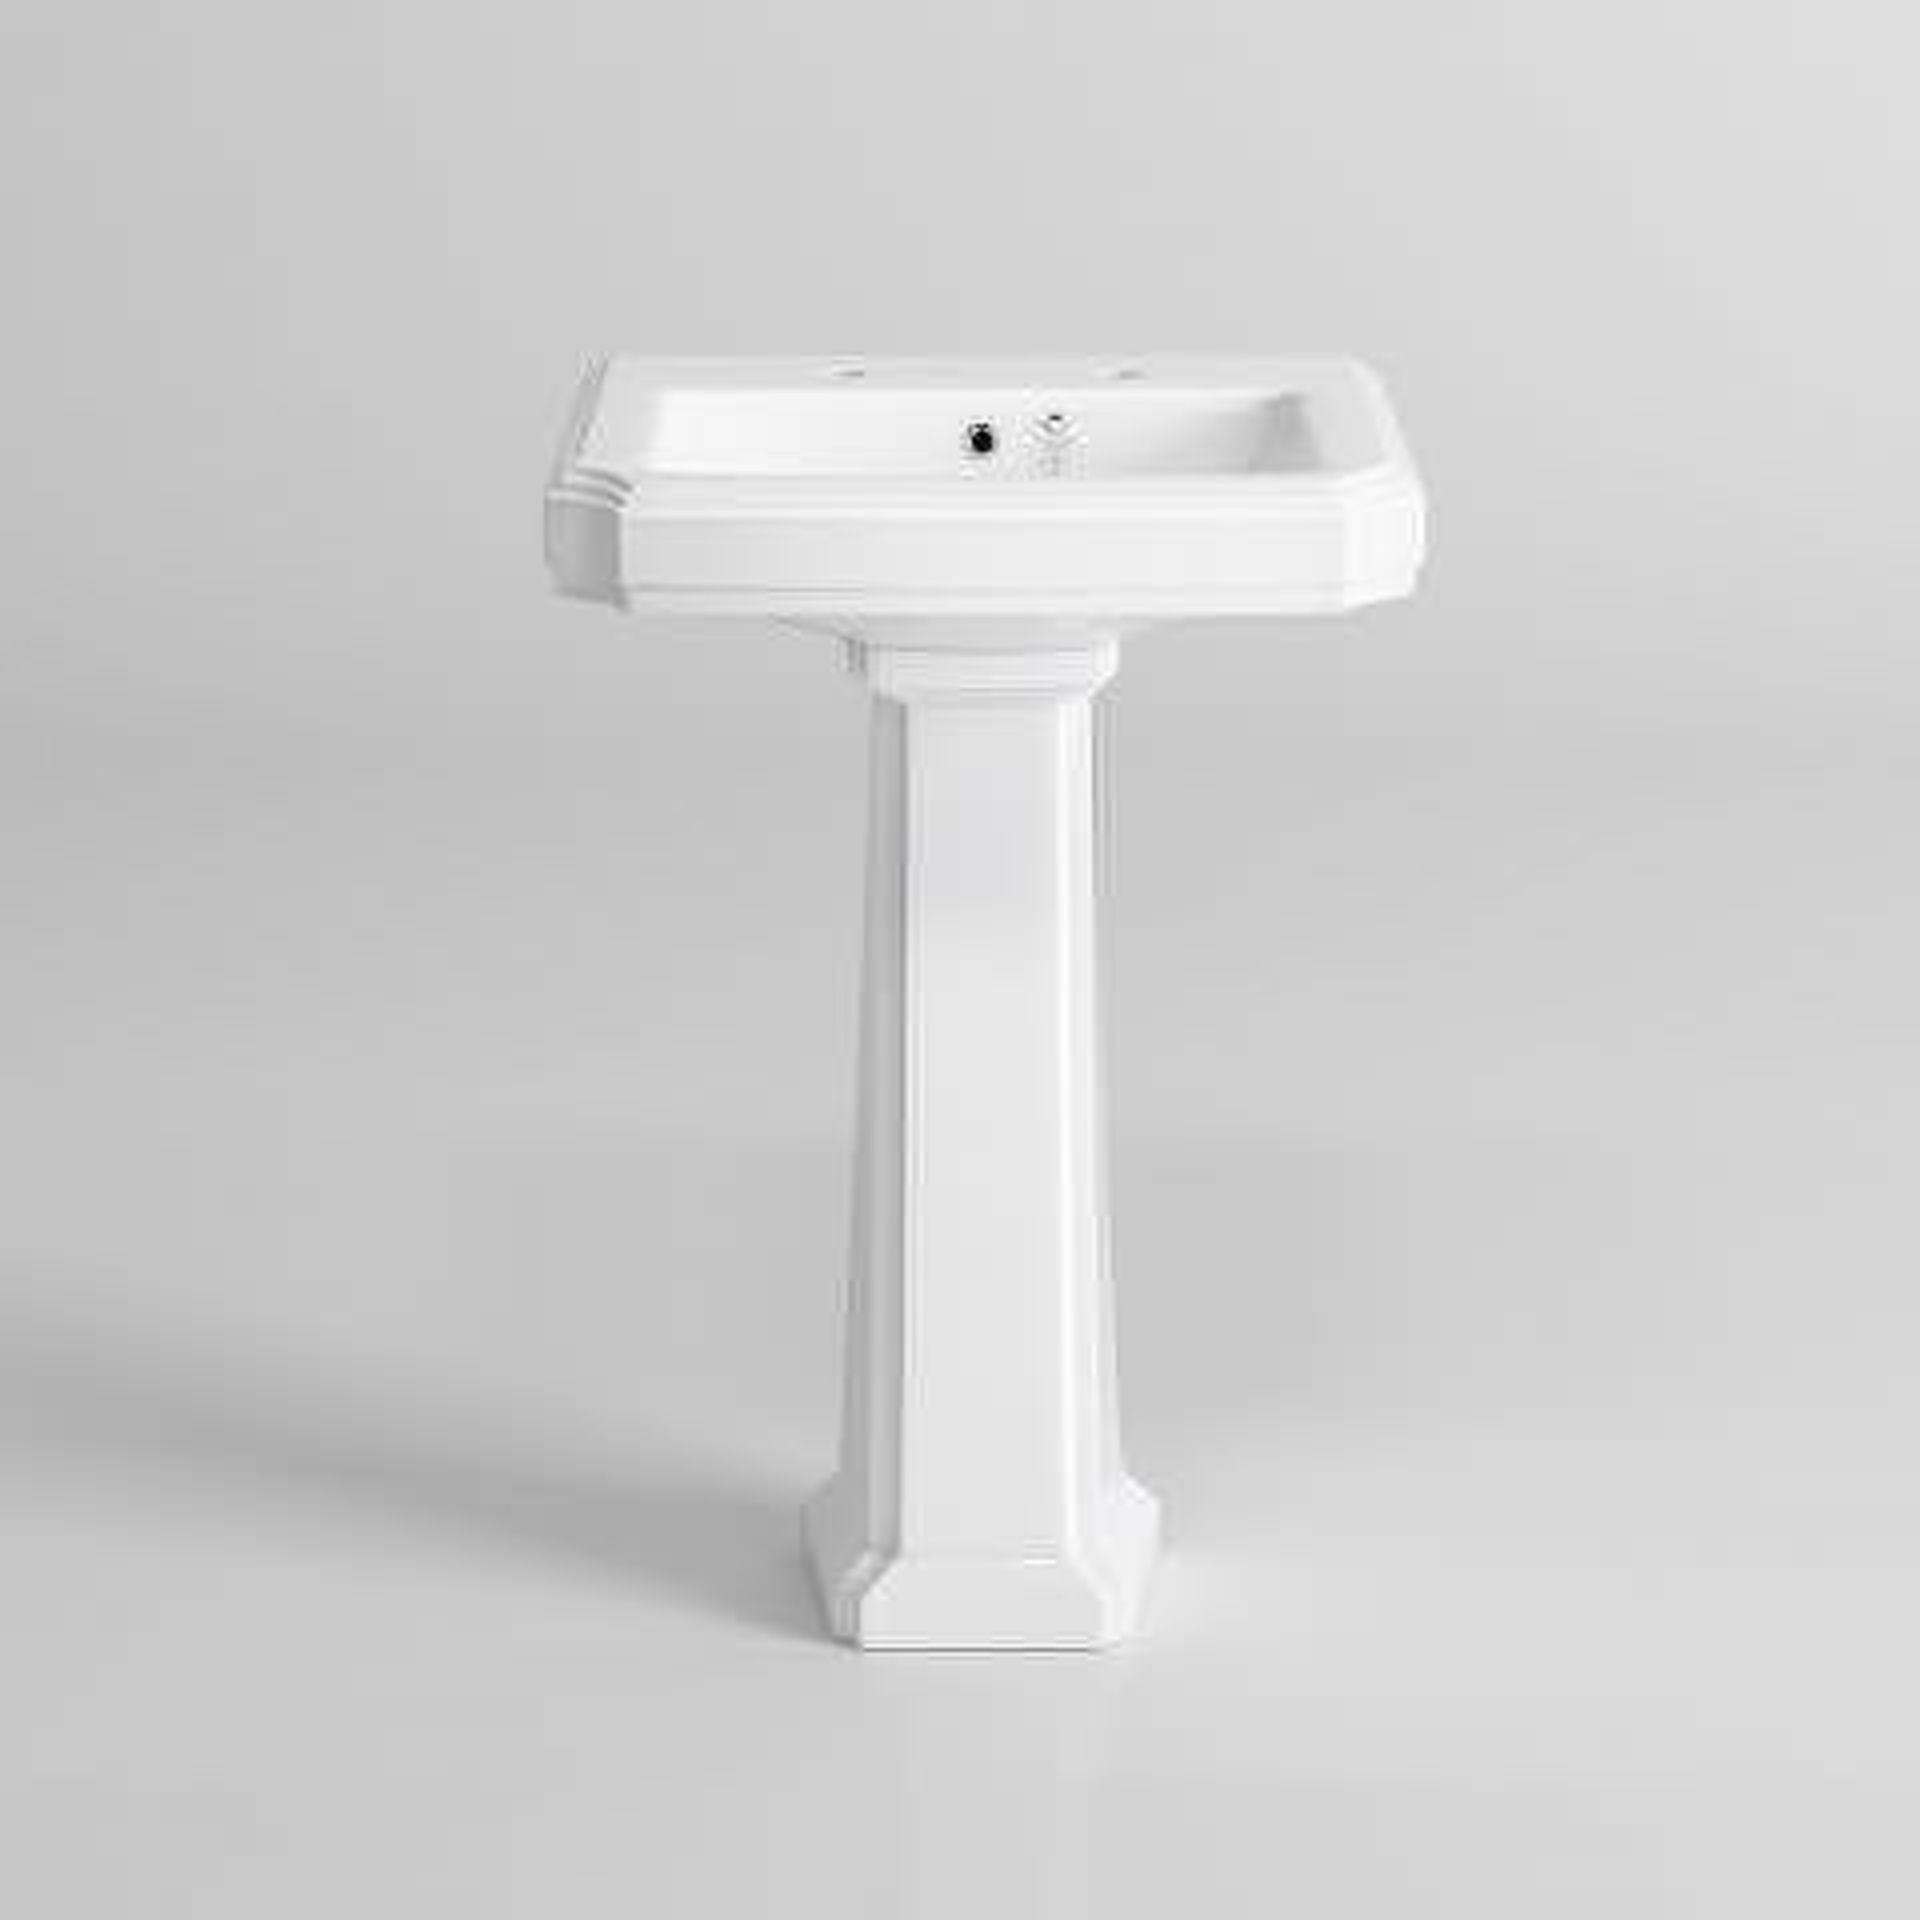 (M7) Georgia II Traditional Basin & Pedestal - Double Tap Hole. RRP £199.99. This elegant basin is - Image 4 of 4